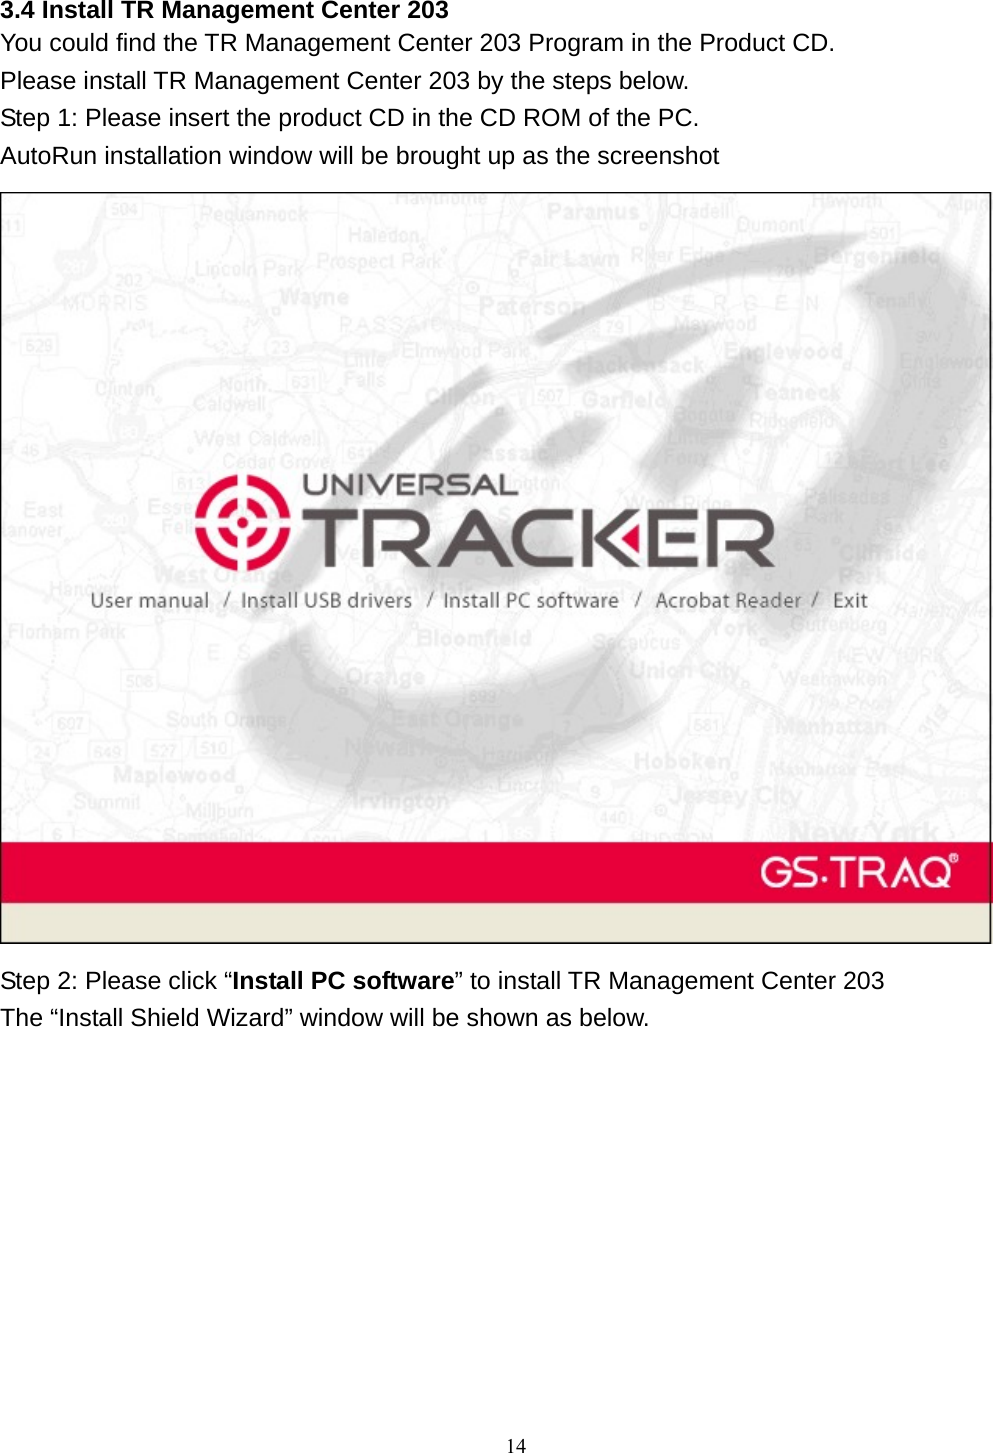  3.4 Install TR Management Center 203 You could find the TR Management Center 203 Program in the Product CD. Please install TR Management Center 203 by the steps below. Step 1: Please insert the product CD in the CD ROM of the PC. AutoRun installation window will be brought up as the screenshot    Step 2: Please click “Install PC software” to install TR Management Center 203 The “Install Shield Wizard” window will be shown as below.  14